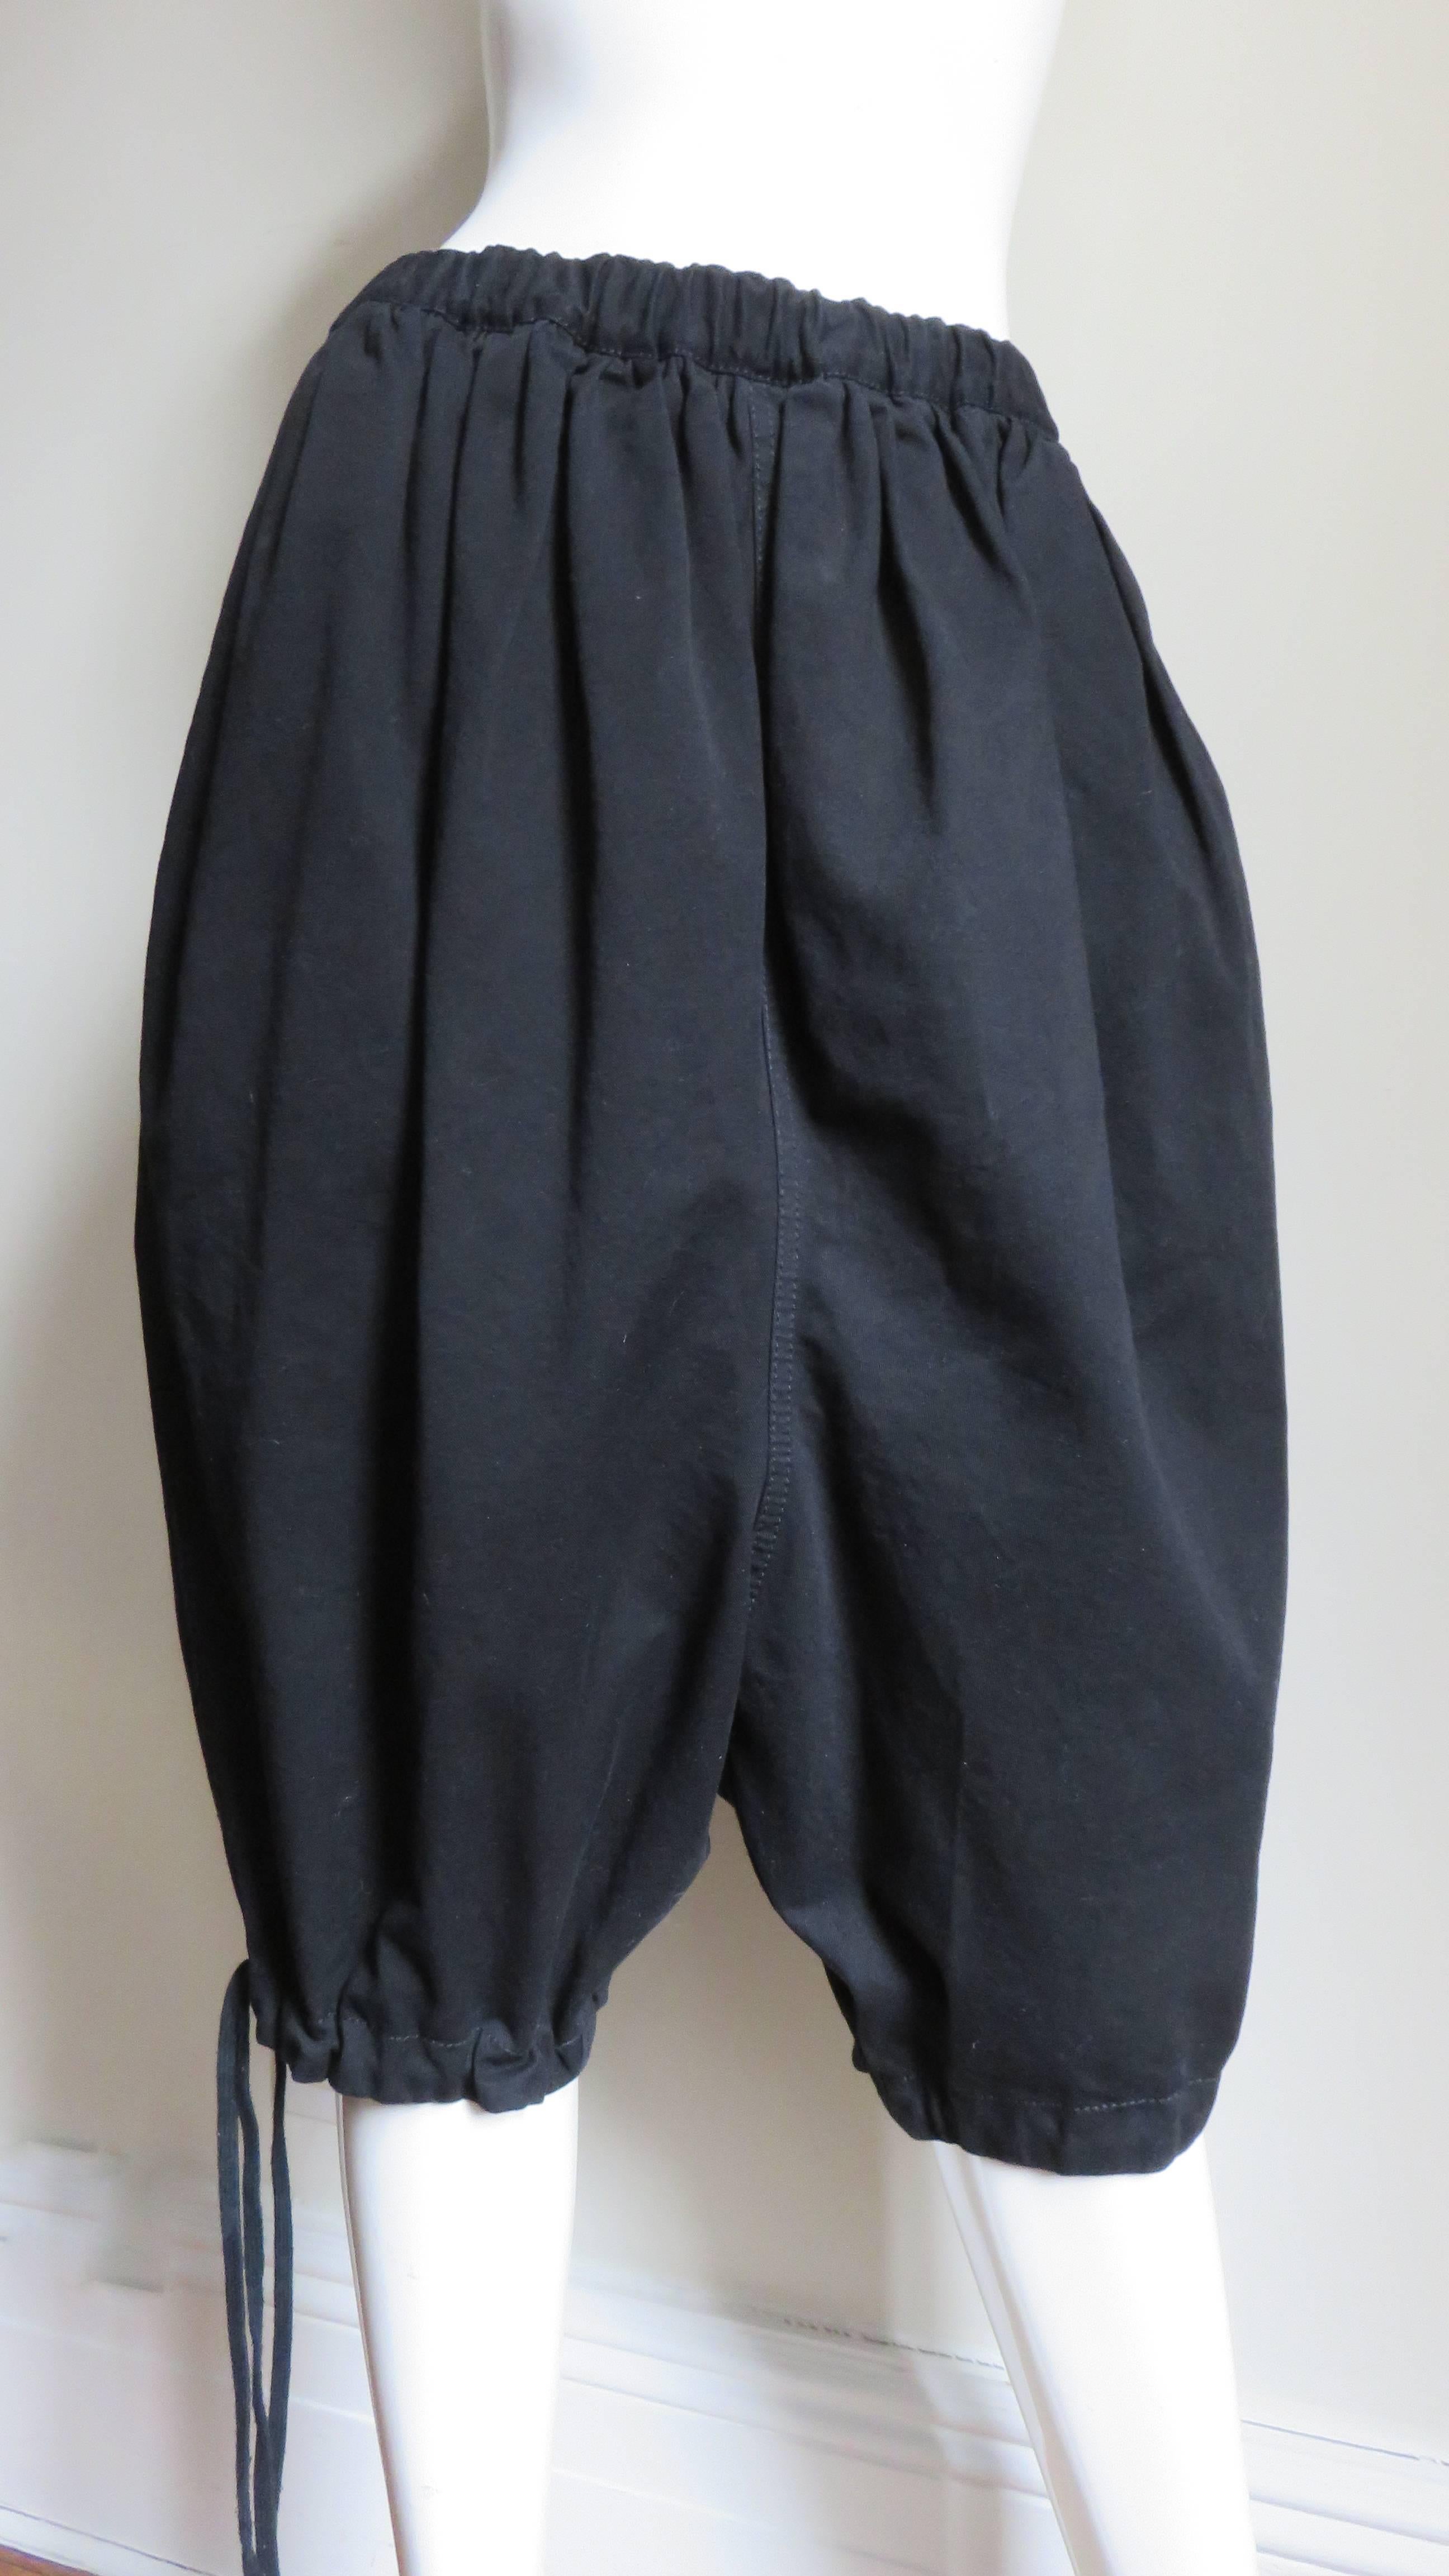 A fabulous pair of dropped crotch pants in rich black denim weight cotton.  They have stretch at the waistband with an inner drawstring from which gathers a full pair of harem style short pants.  There are also functional drawstrings at the legs and